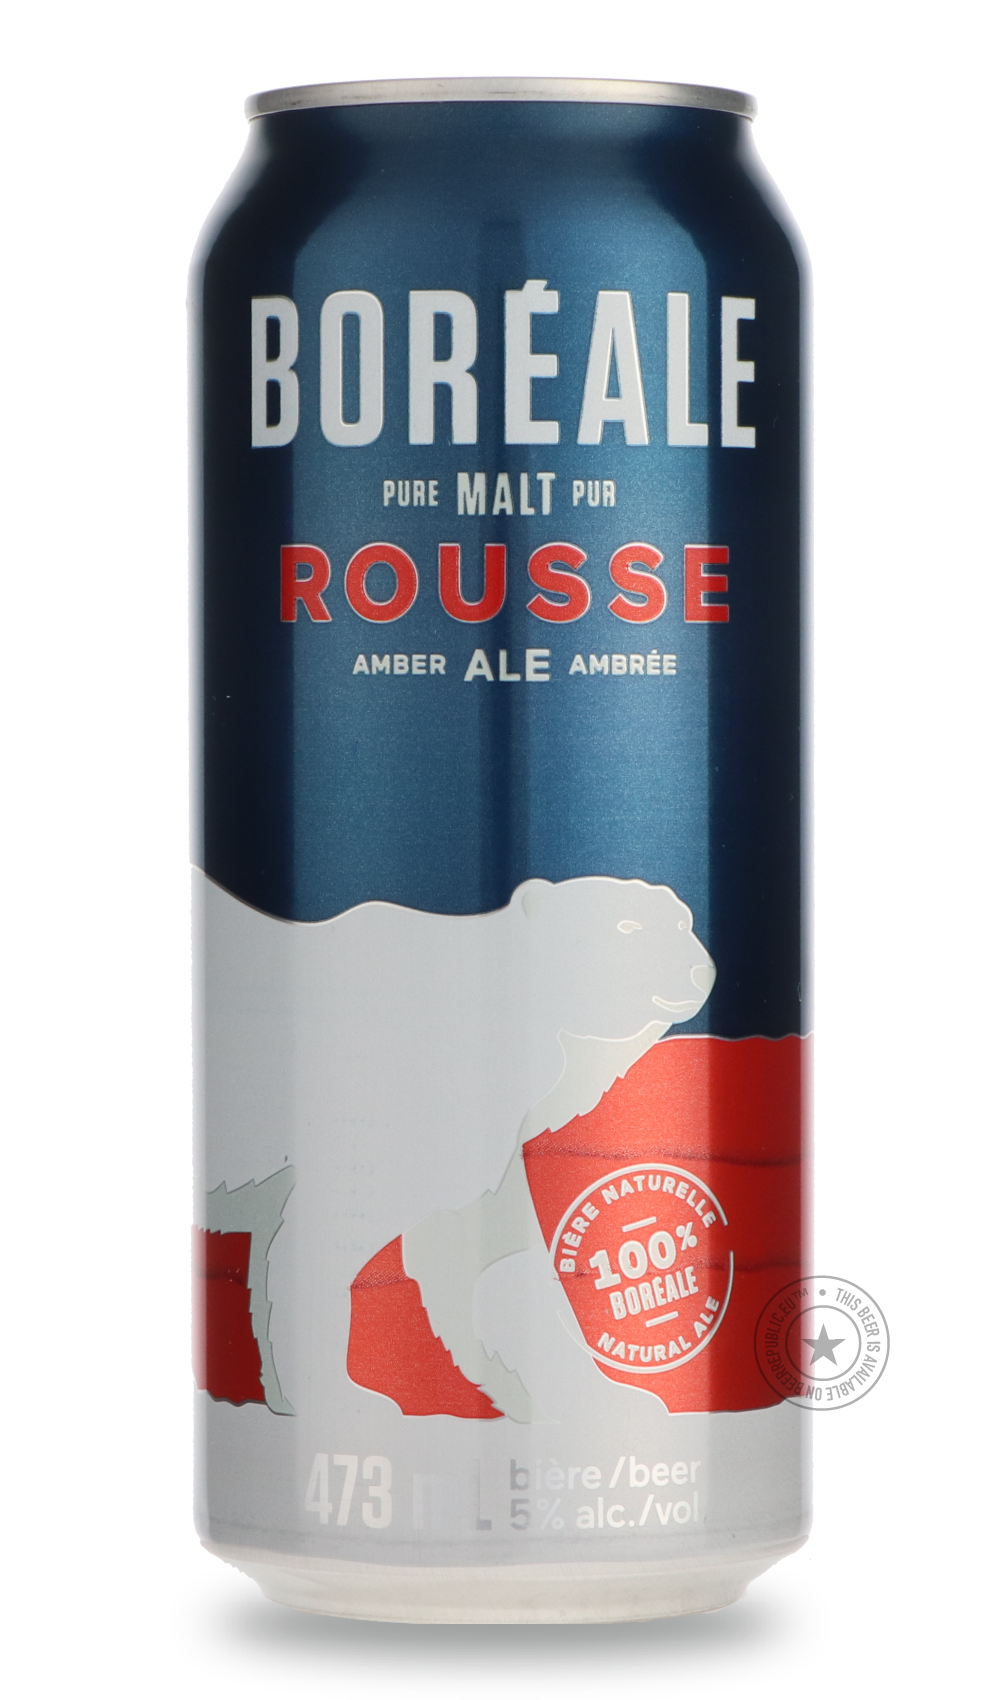 -Boréale- Rousse-Brown & Dark- Only @ Beer Republic - The best online beer store for American & Canadian craft beer - Buy beer online from the USA and Canada - Bier online kopen - Amerikaans bier kopen - Craft beer store - Craft beer kopen - Amerikanisch bier kaufen - Bier online kaufen - Acheter biere online - IPA - Stout - Porter - New England IPA - Hazy IPA - Imperial Stout - Barrel Aged - Barrel Aged Imperial Stout - Brown - Dark beer - Blond - Blonde - Pilsner - Lager - Wheat - Weizen - Amber - Barley 